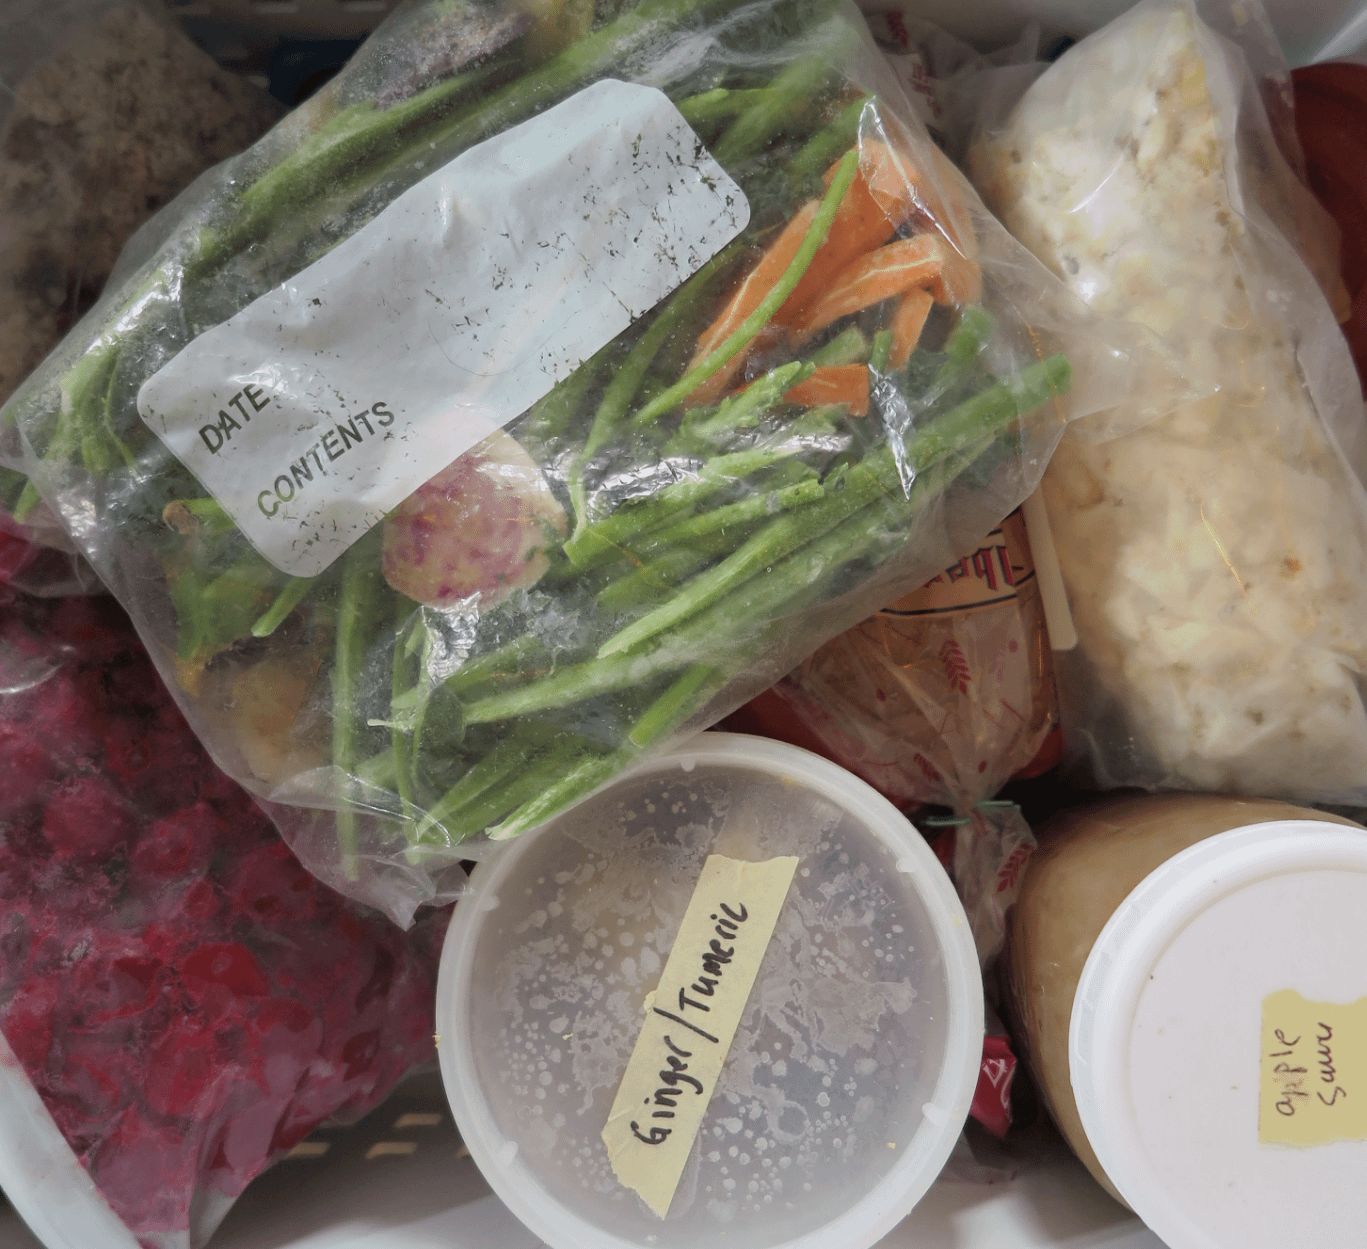 Overhead shot of bags and containers in a freezer drawer